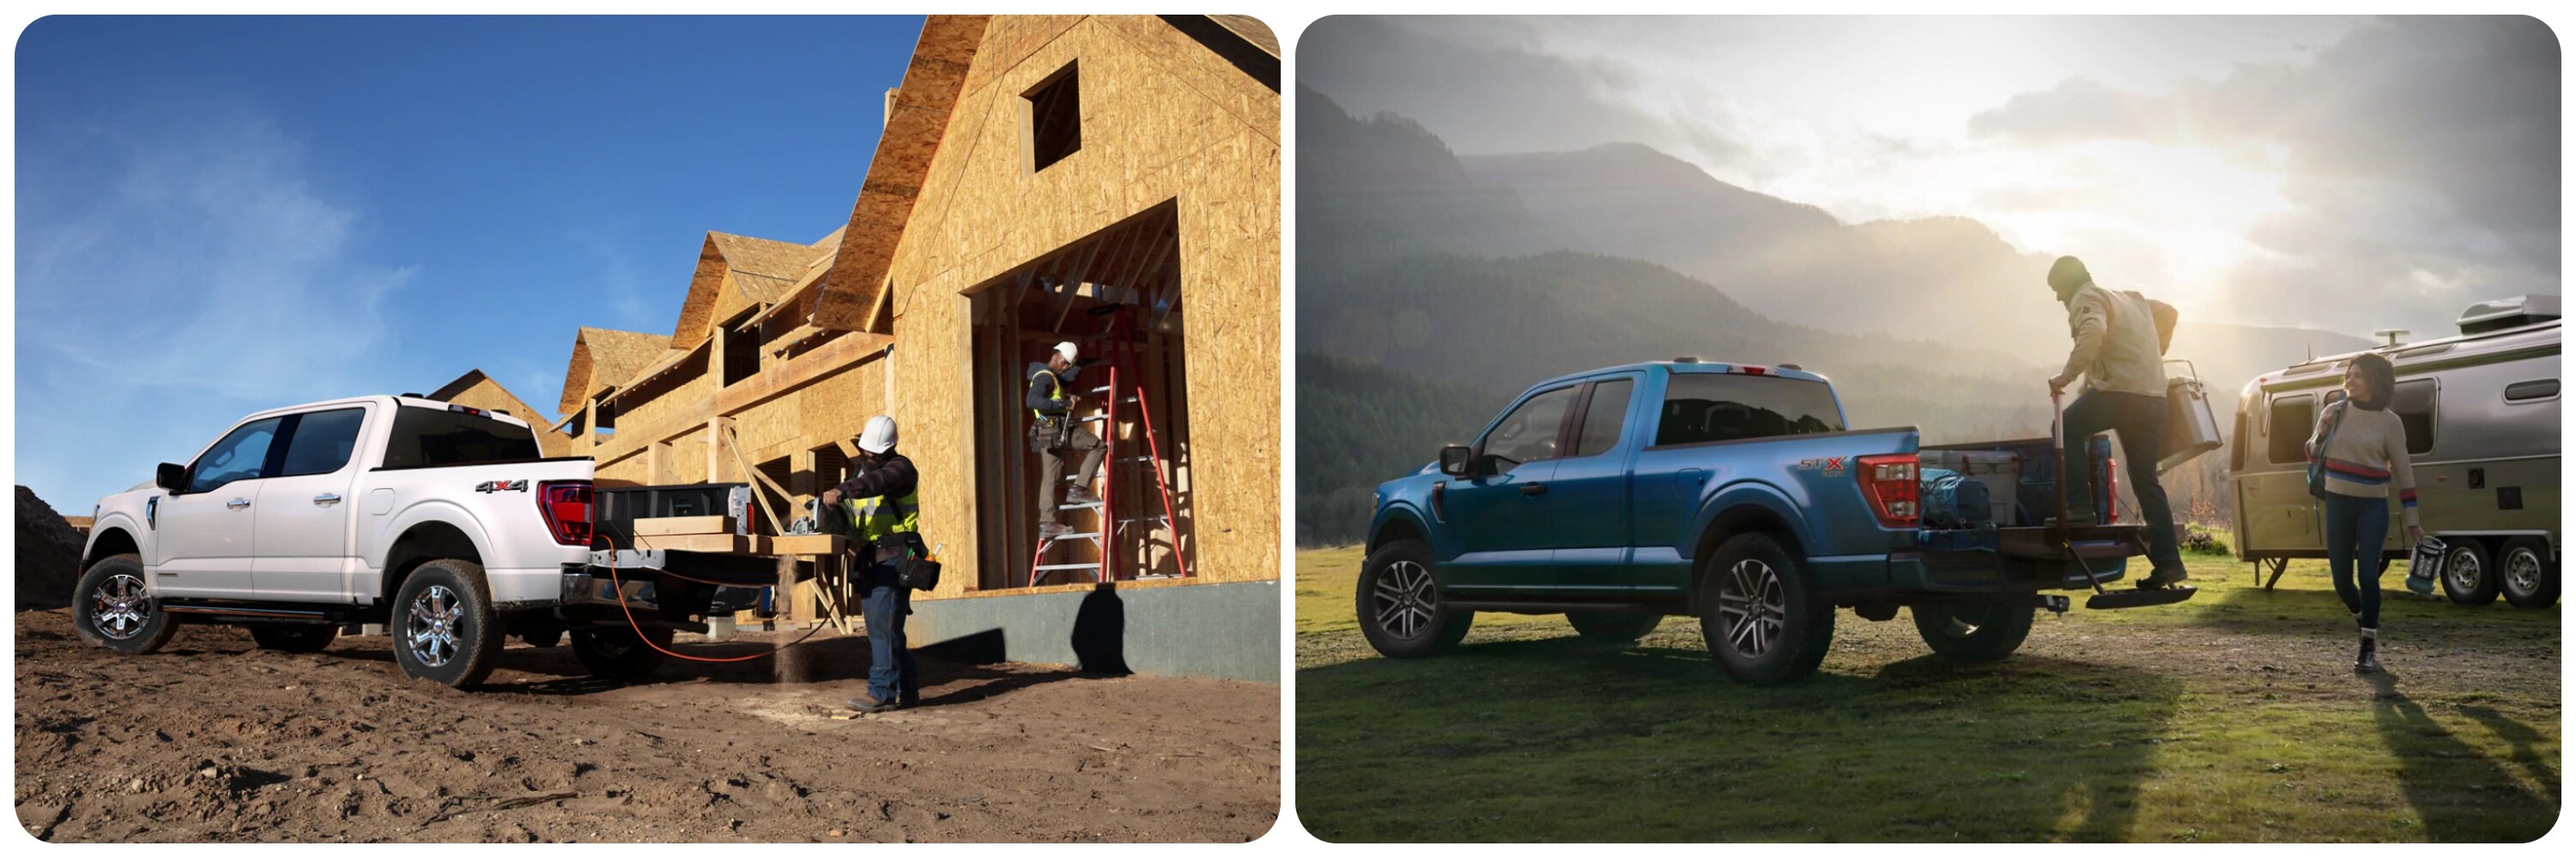 On the left a white 2022 Ford F-150 sits parked at a construction site as a man cuts lumber off the bed of the truck. On the right, a blue 2021 Ford F-150 is parked in a field as a man loads camping gear into the bed.